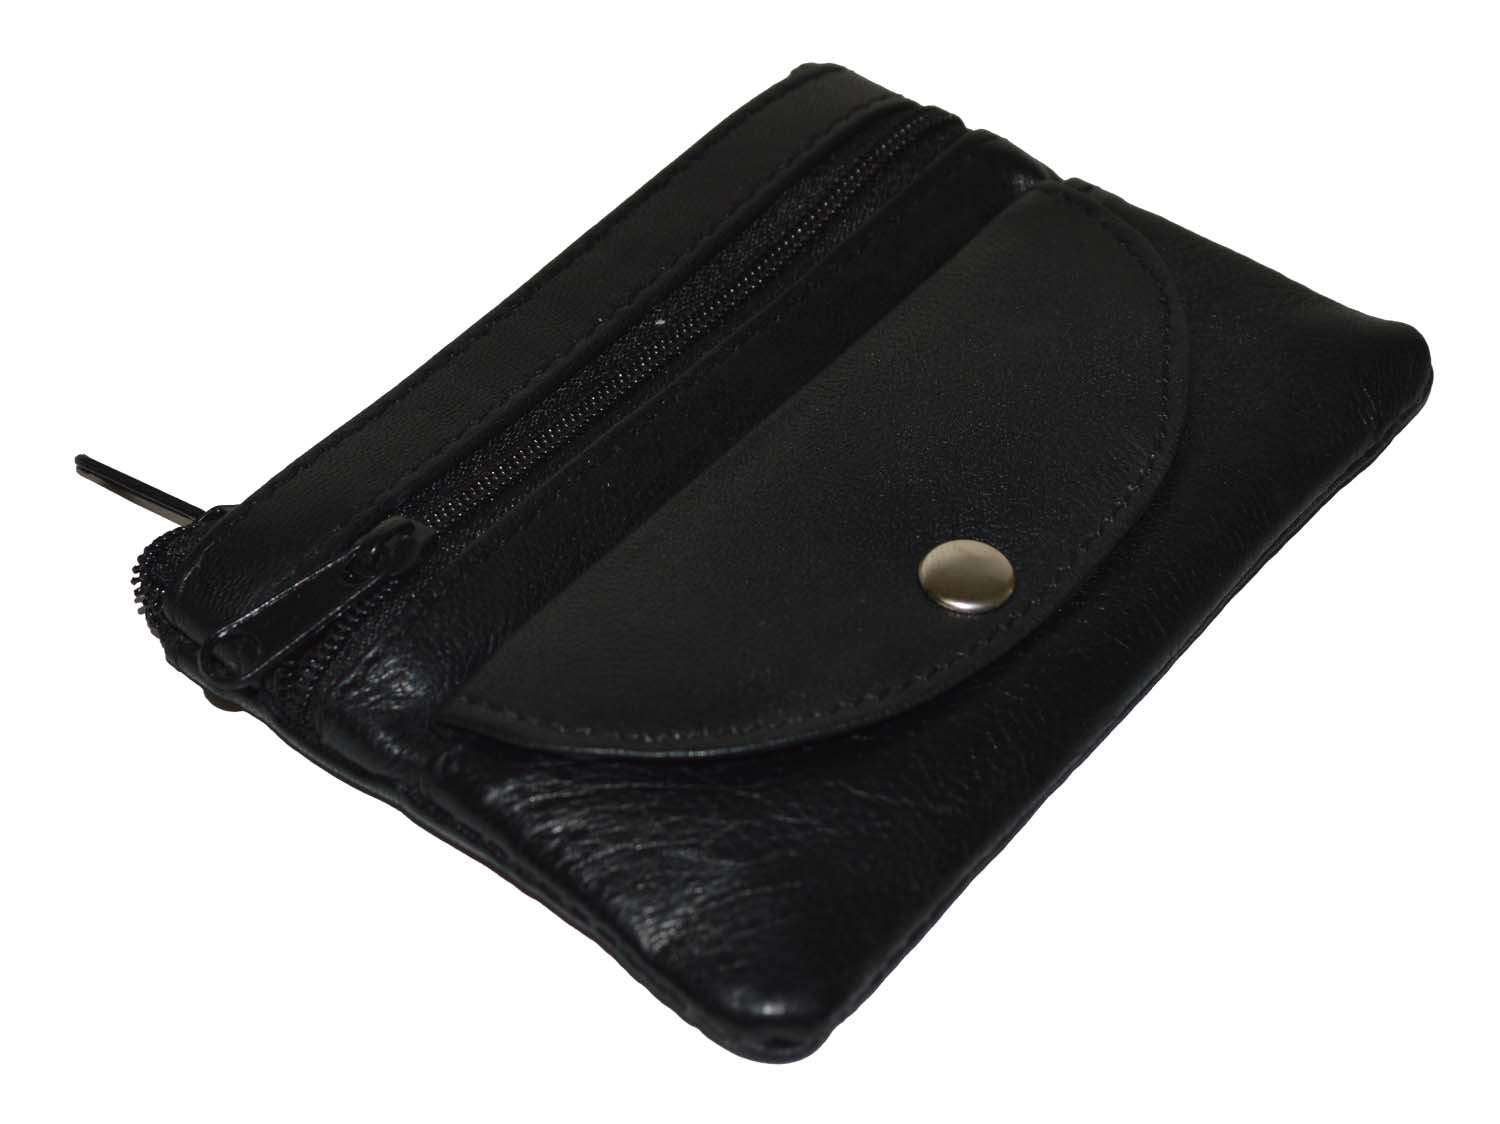 Black Leather Coin Purse Mini Wallet Key Pouch 2 Zippered Sections ID Slot Black